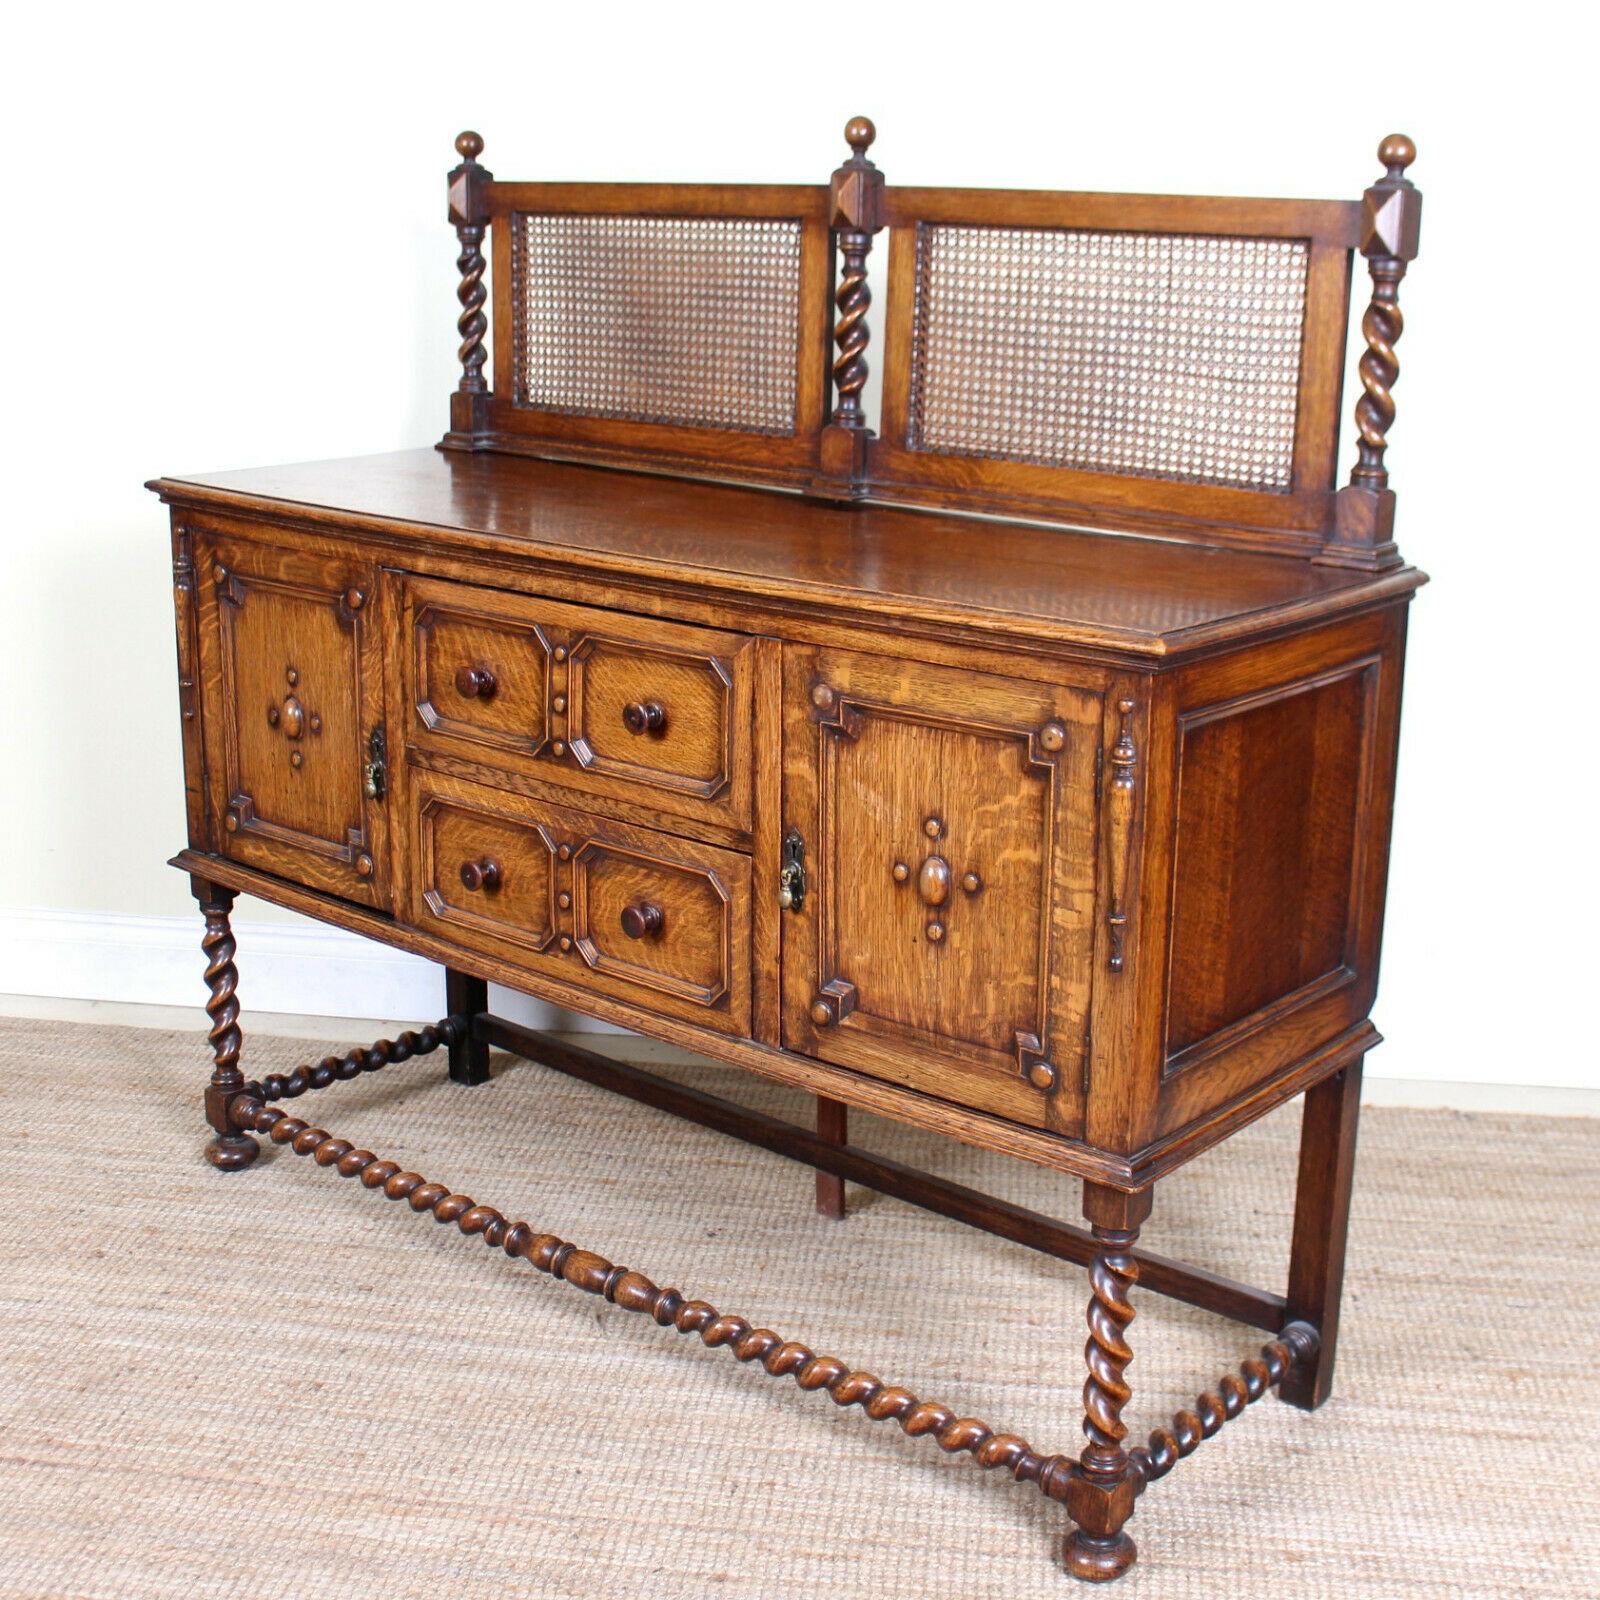 An fine quality 19th century sideboard in the Arts & Crafts manner.
Constructed from solid oak boasting a rich honey patina and well figured wild grain and boasting impressive carvings throughout with chamfered edges.
A carved bergere paneled